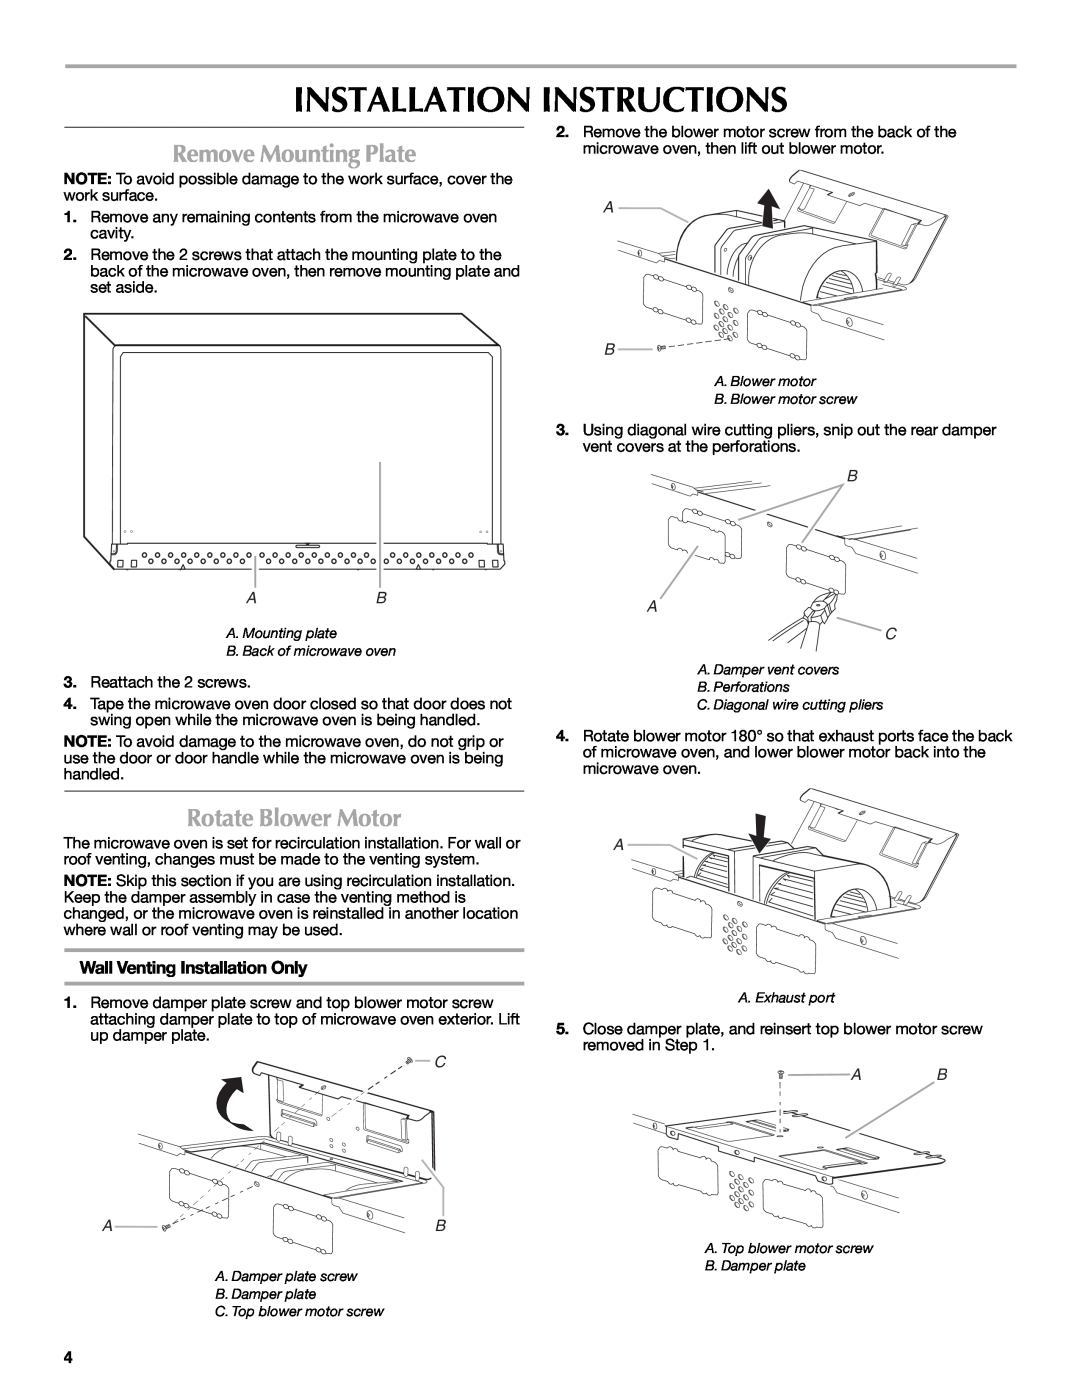 Maytag W10188238A Installation Instructions, Remove Mounting Plate, Rotate Blower Motor, Wall Venting Installation Only 